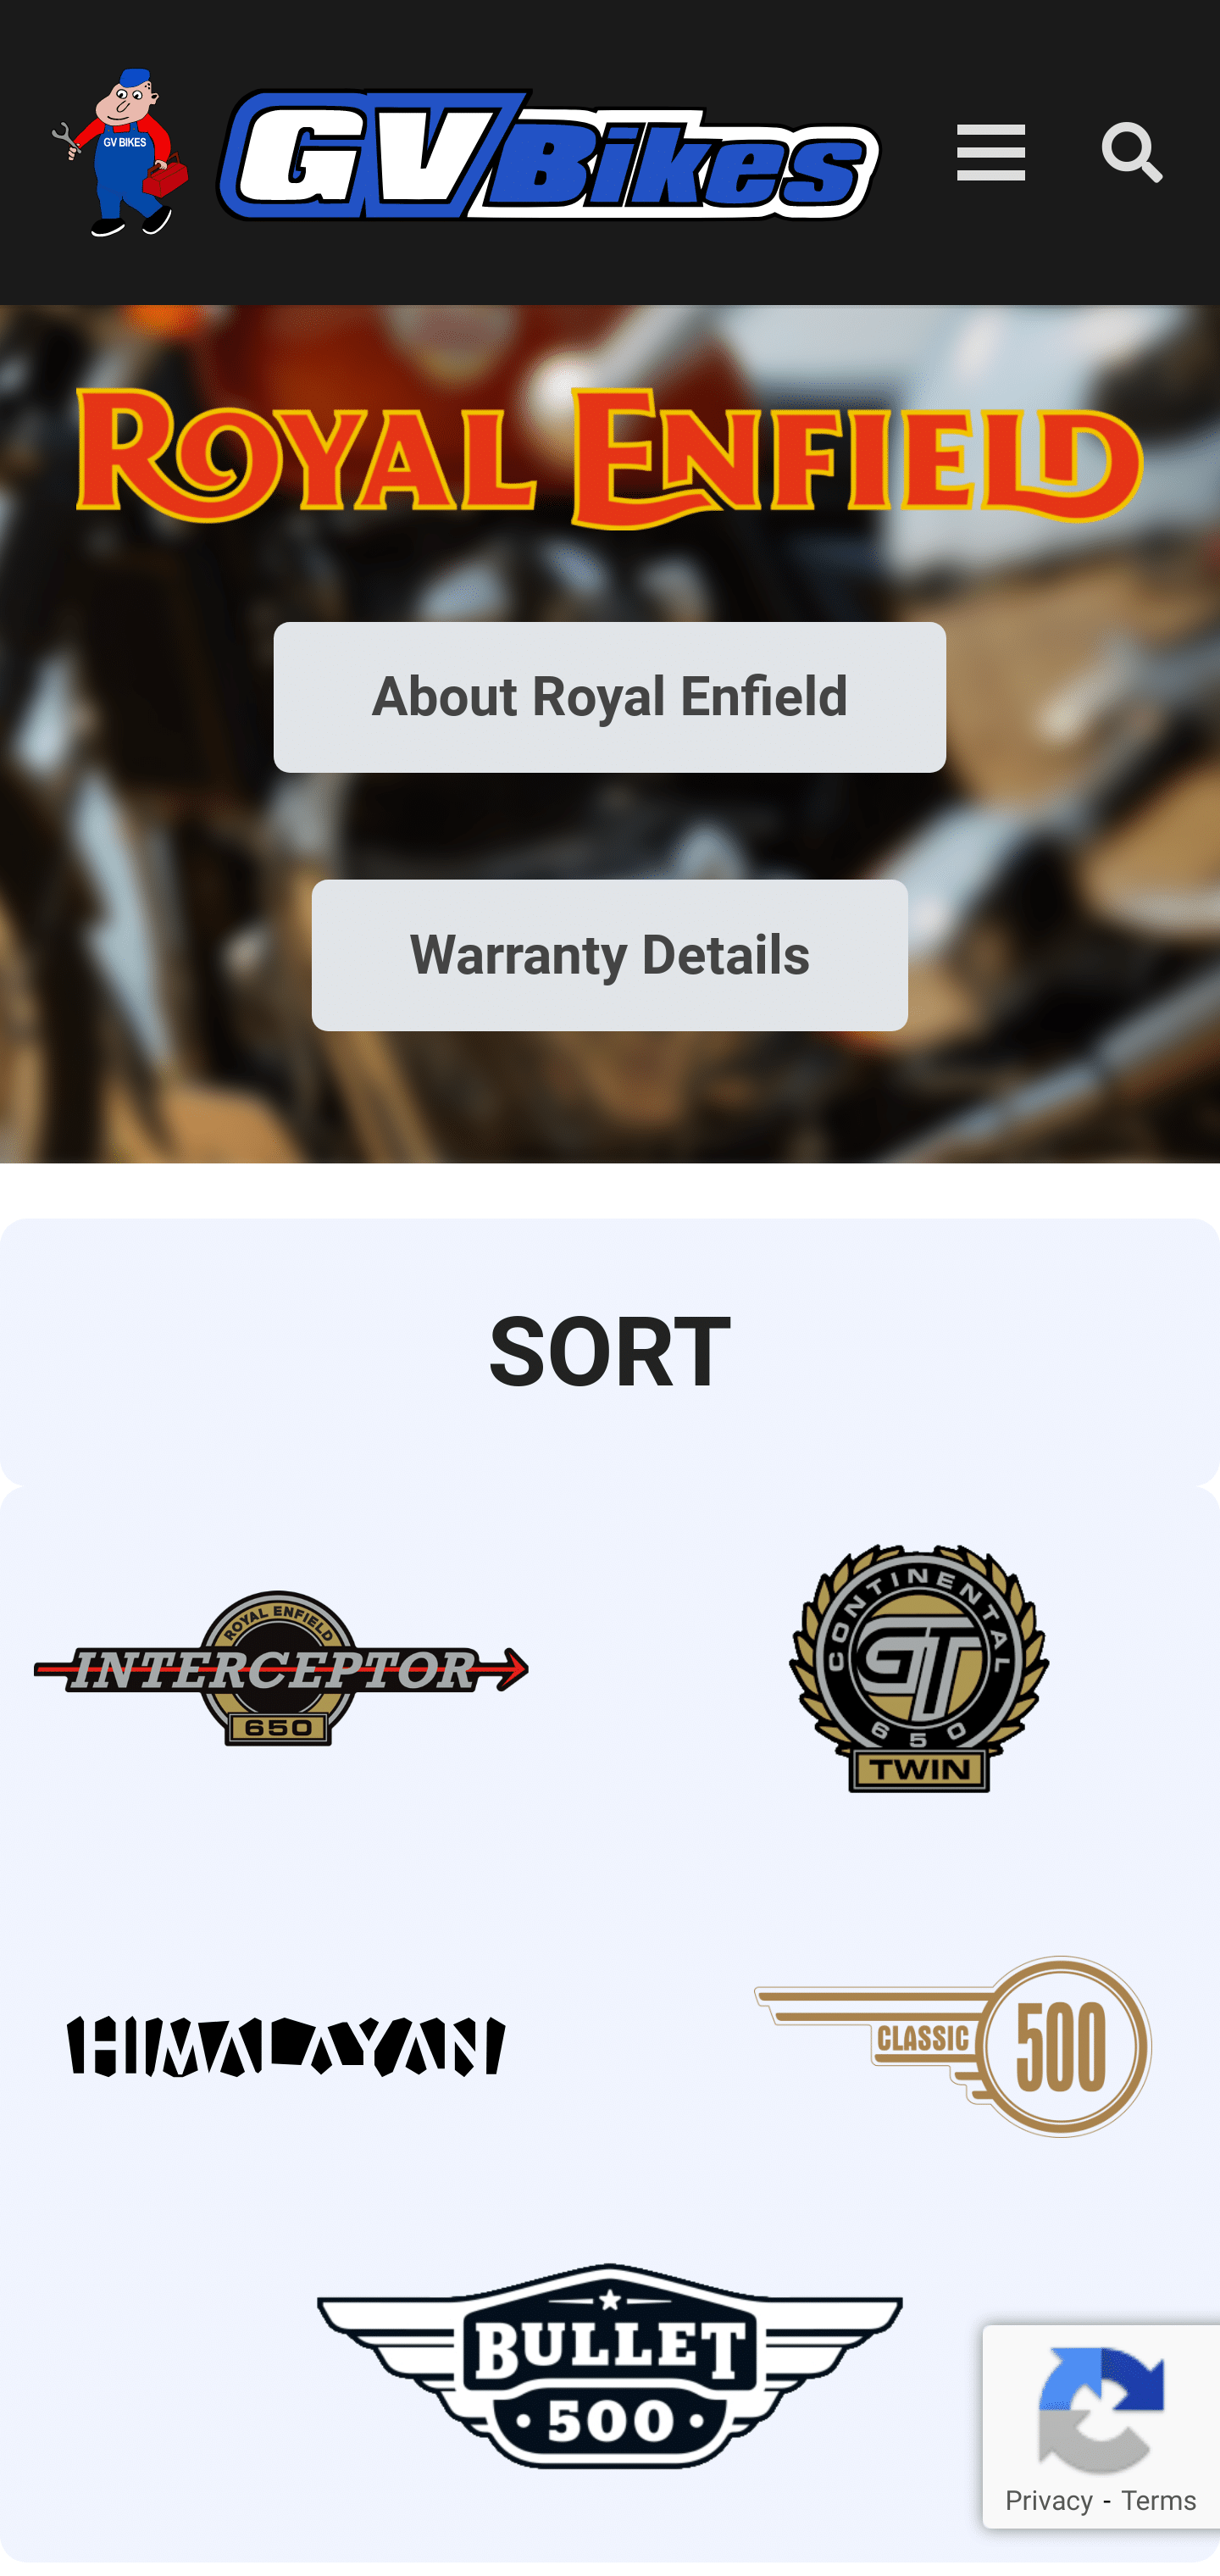 Royal Enfield Category